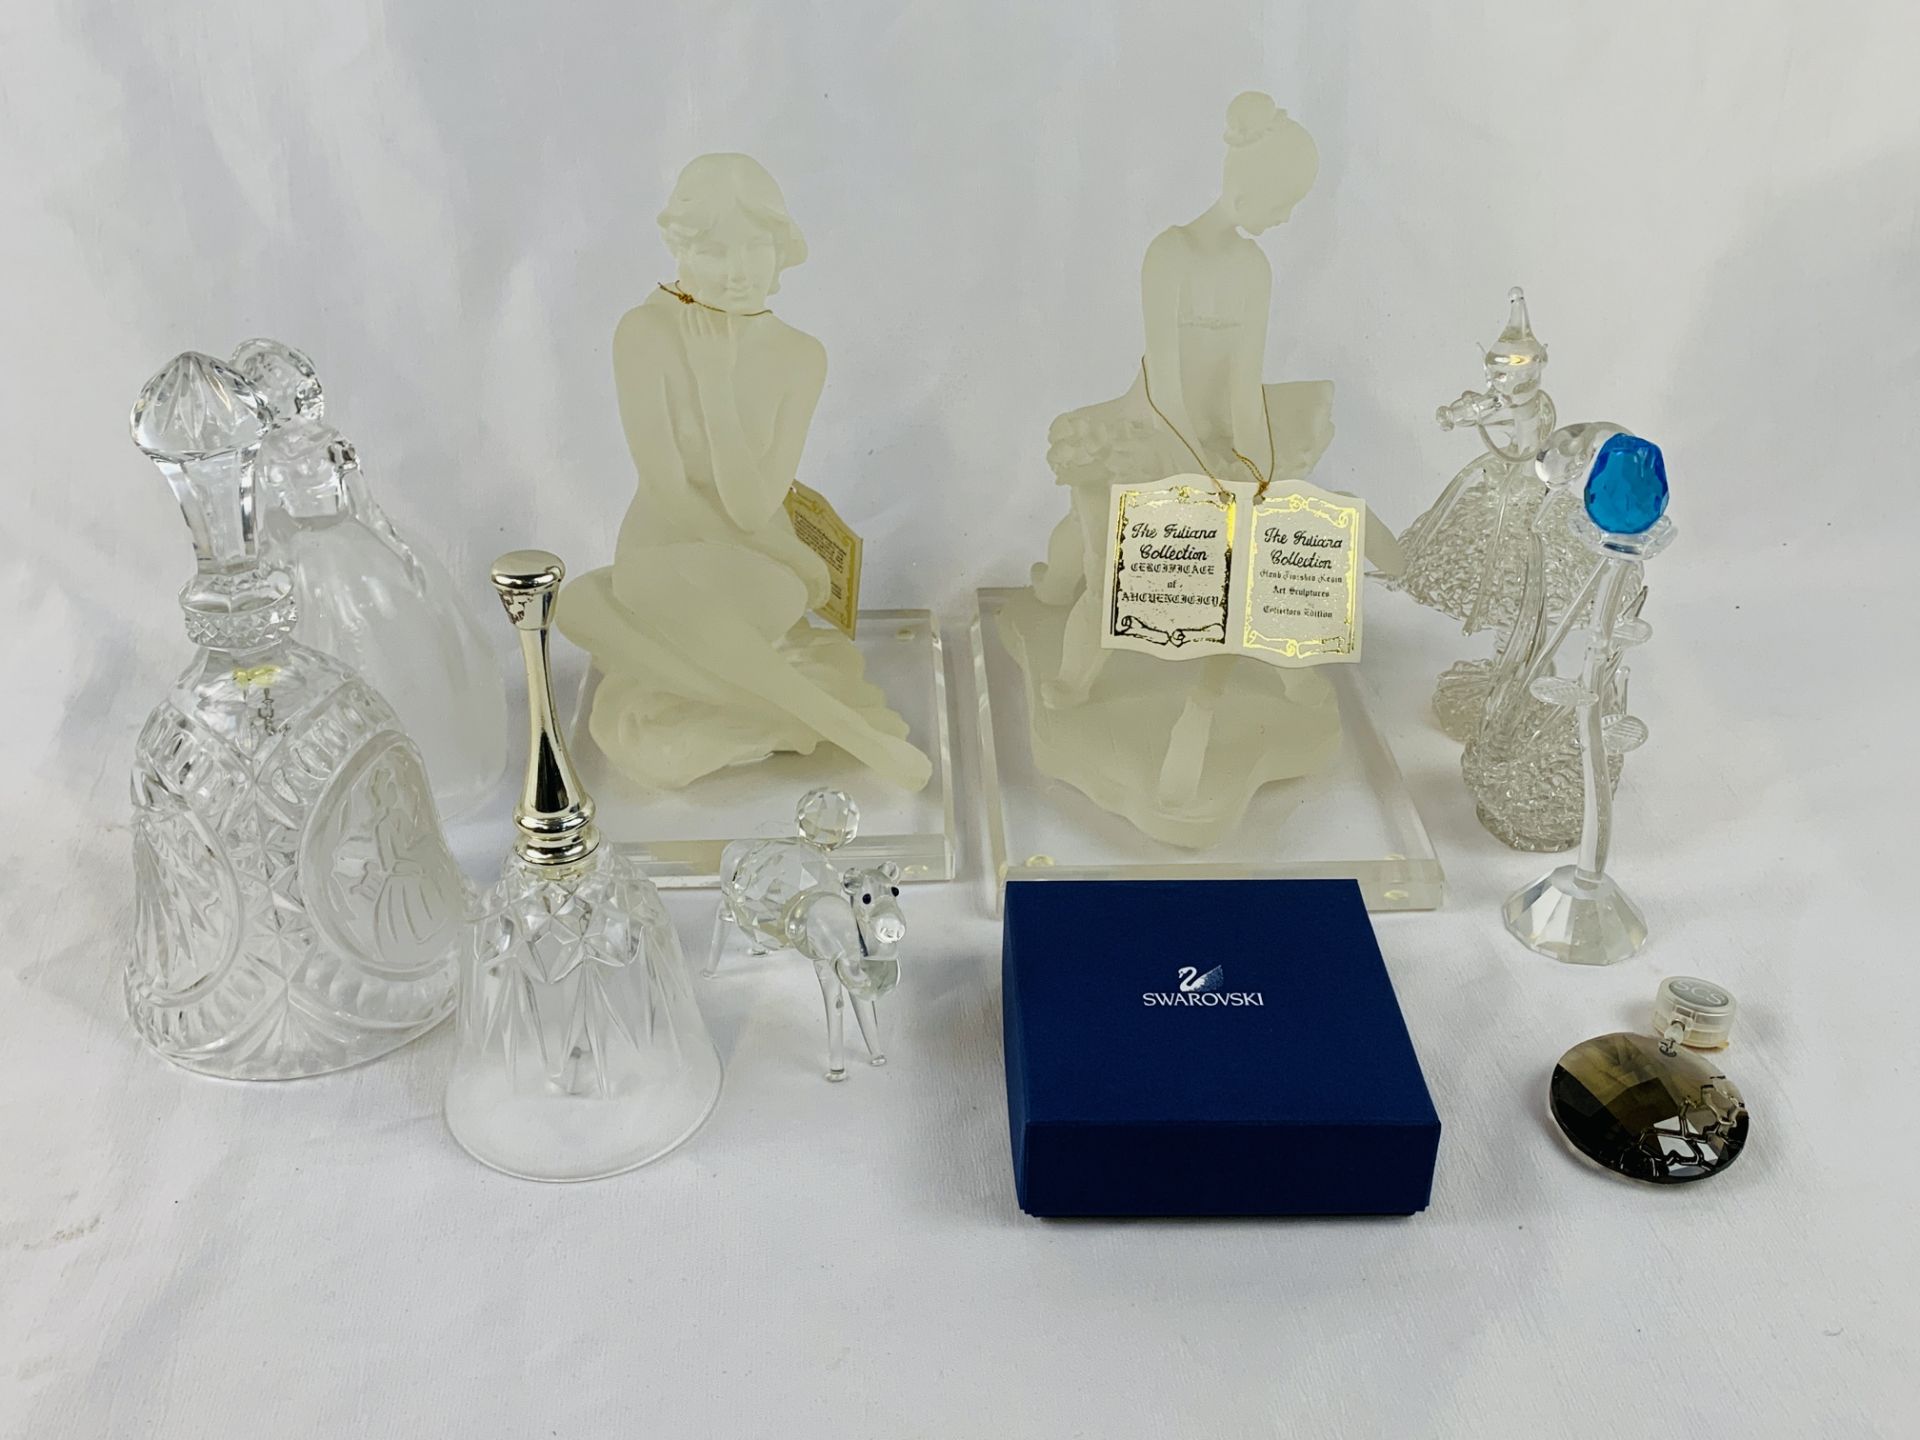 A collection of decorative glassware